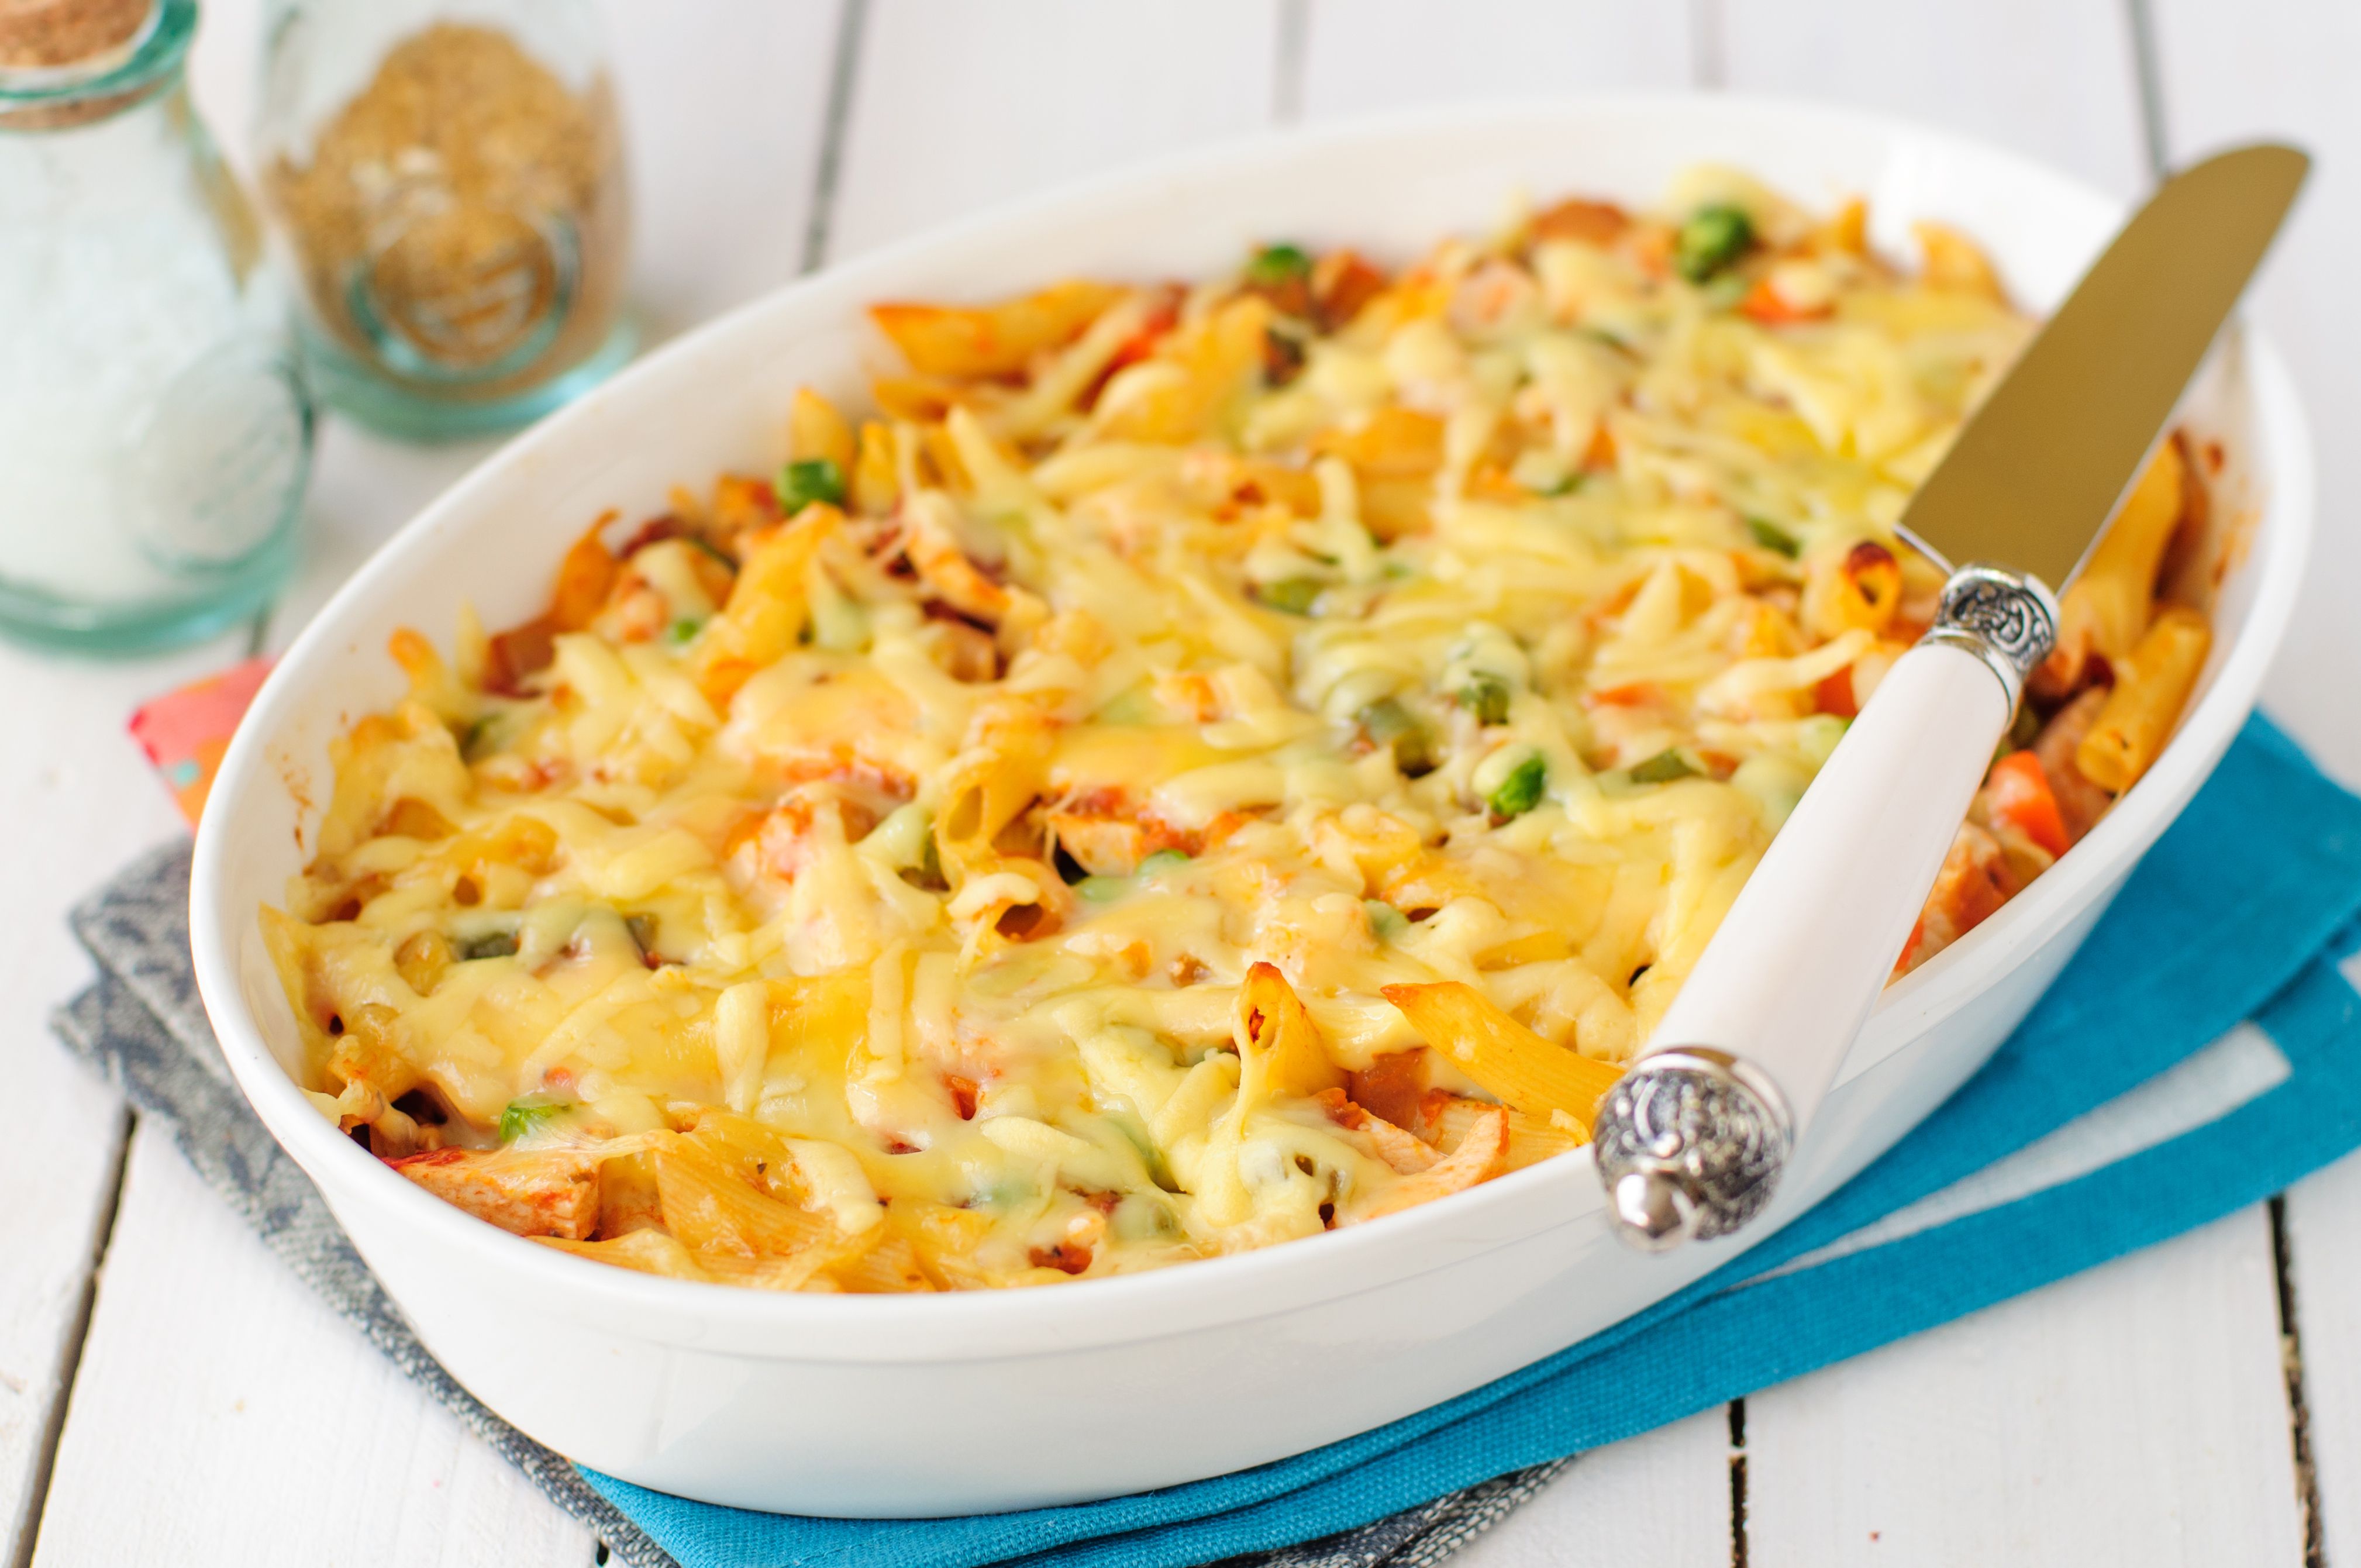 Macaroni, Pumpkin, Chicken and Cheese Pasta Bake served on a white plate. | Source: Shutterstock